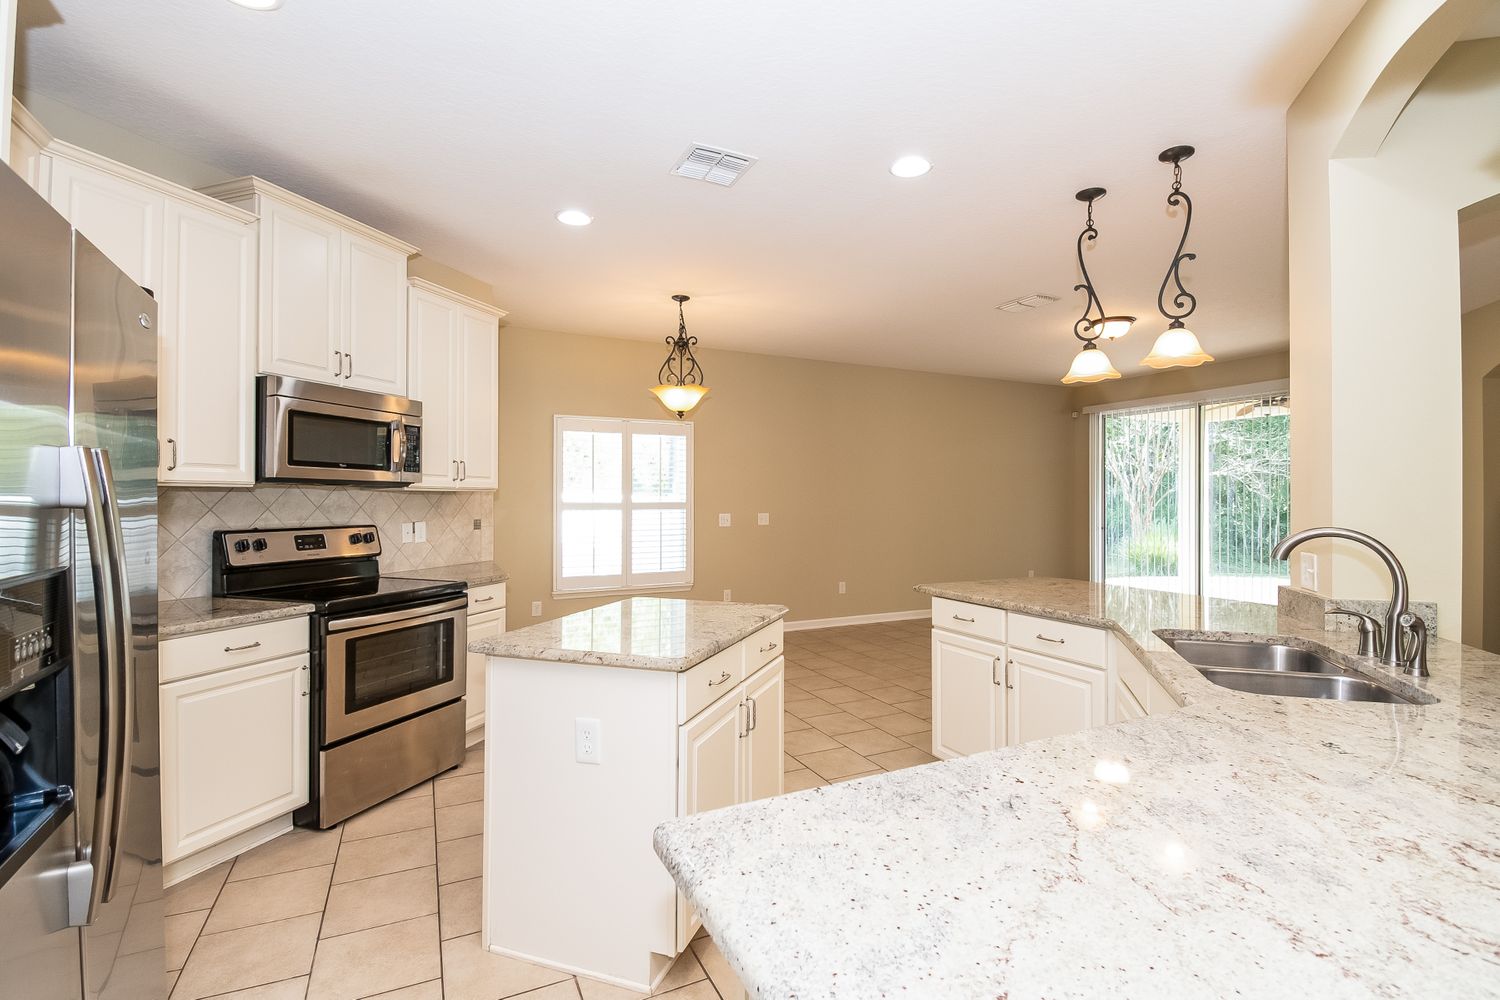 Beautiful kitchen with granite countertops and stainless steel appliances at Invitation Homes Jacksonville.